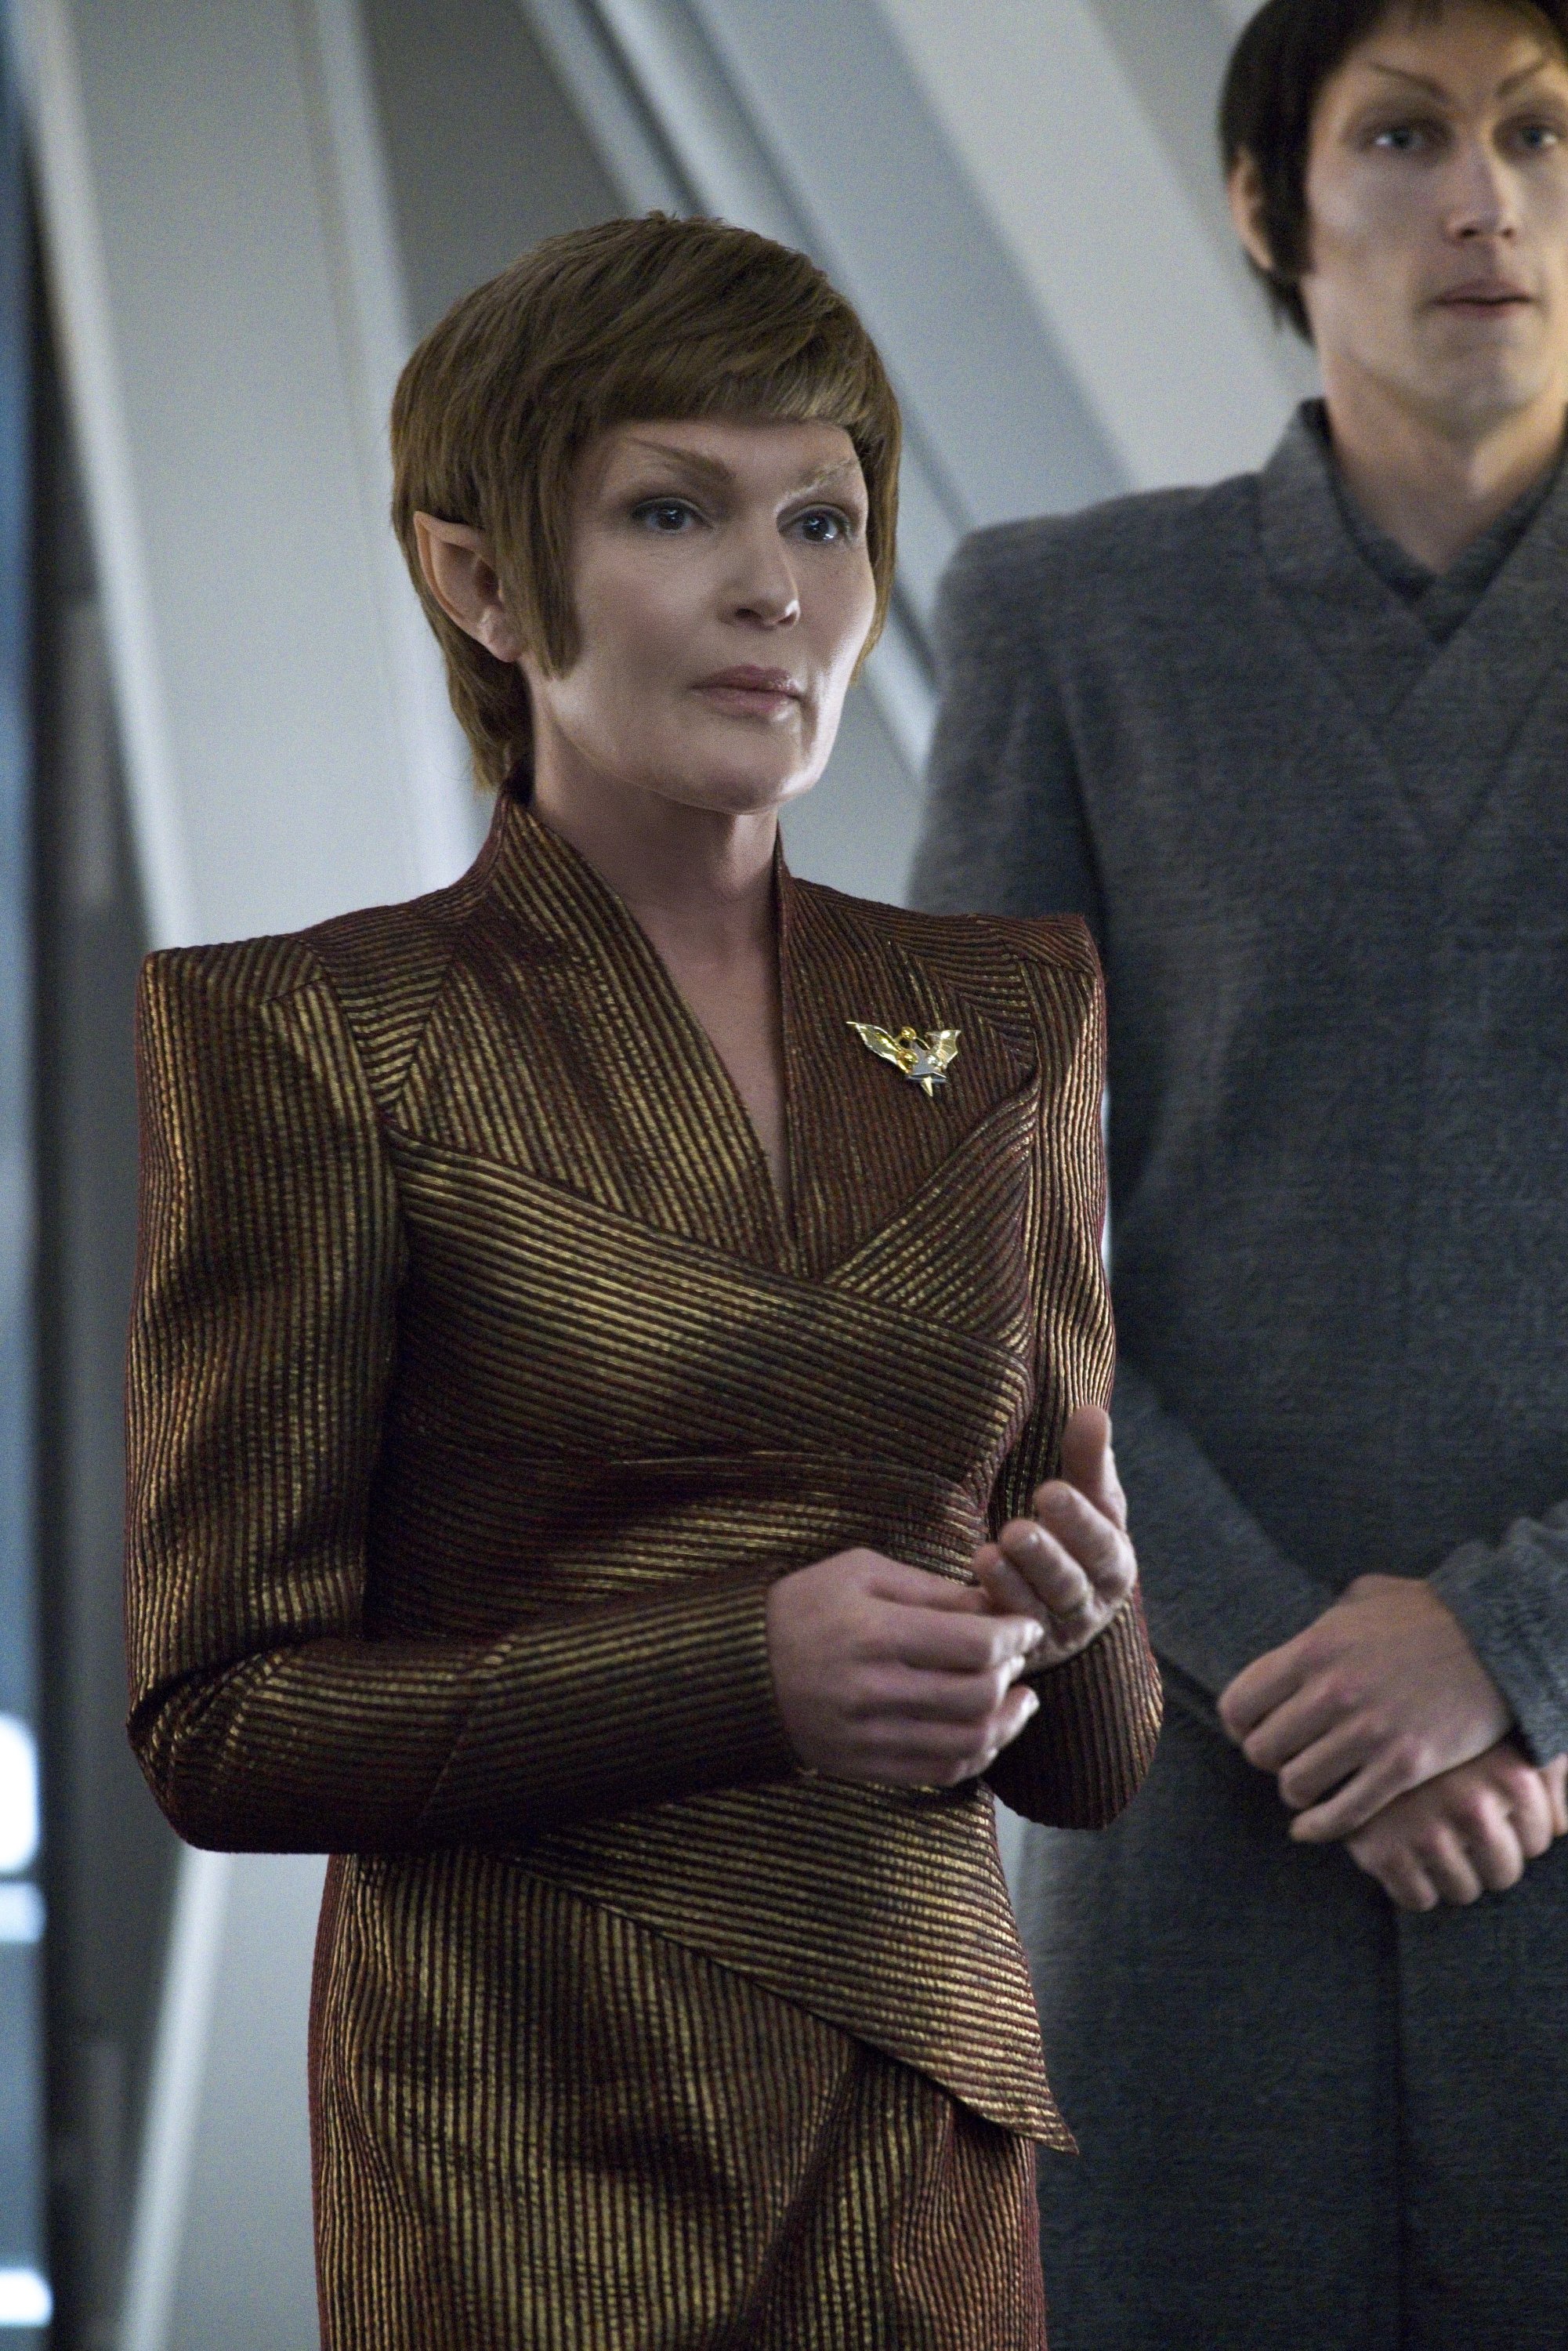   Pictured: Tara Rosling as T'Rina of the Paramount+ original series STAR TREK: DISCOVERY. Photo Cr: Michael Gibson/Paramount+ (C) 2021 CBS Interactive. All Rights Reserved.  